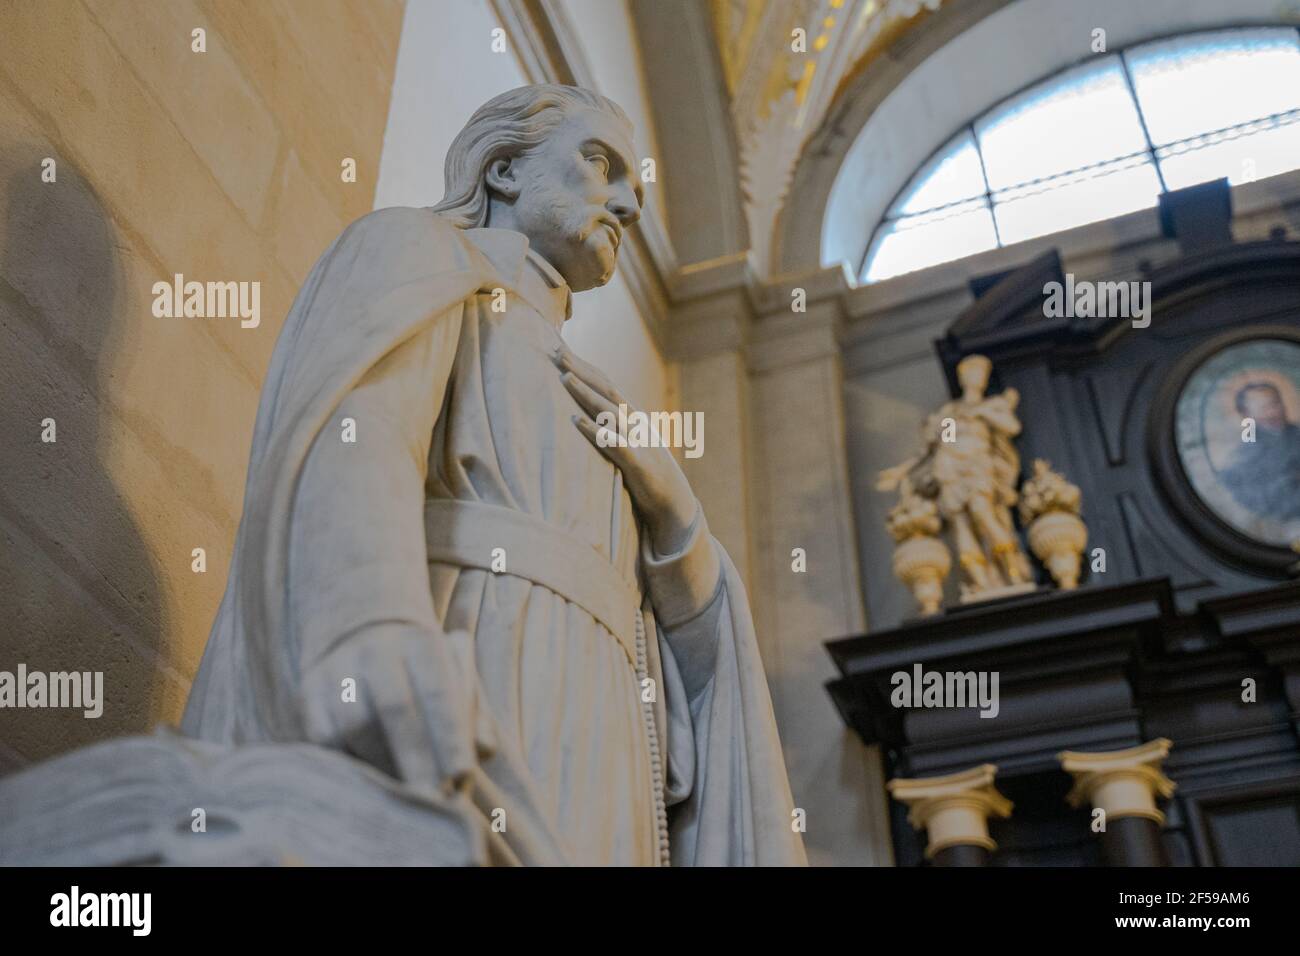 The sculpture of a religious man with his hand placed on his heart in the Catholic church interior under natural light, Krakow, Poland Stock Photo